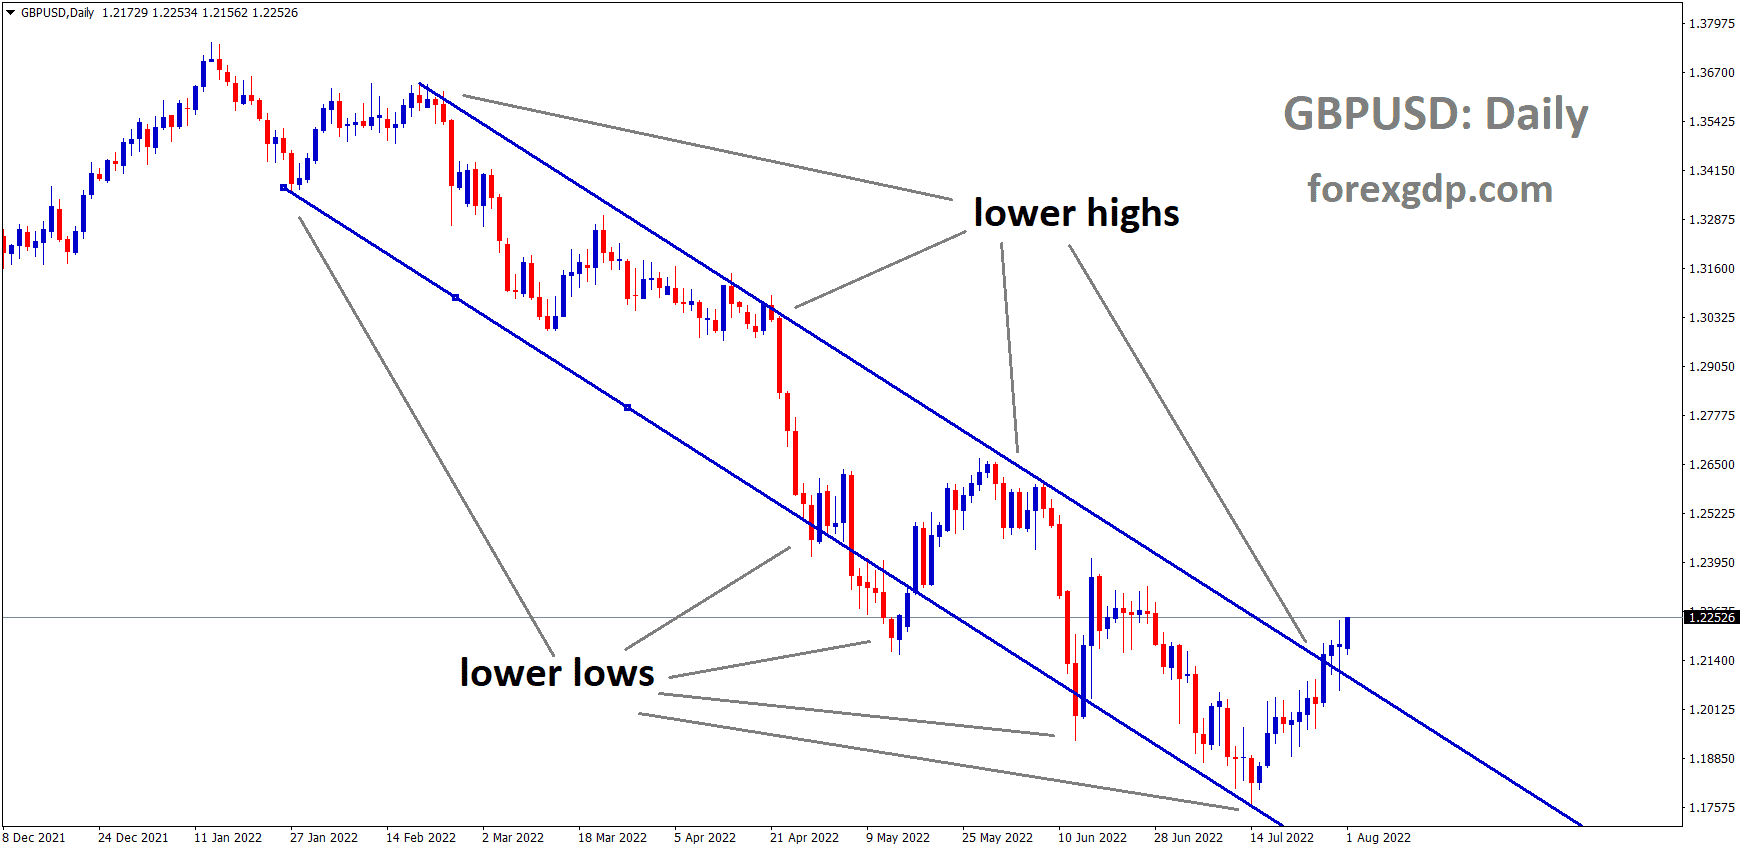 GBPUSD is moving in the Descending channel and the Market has reached the Lower high area of the channel